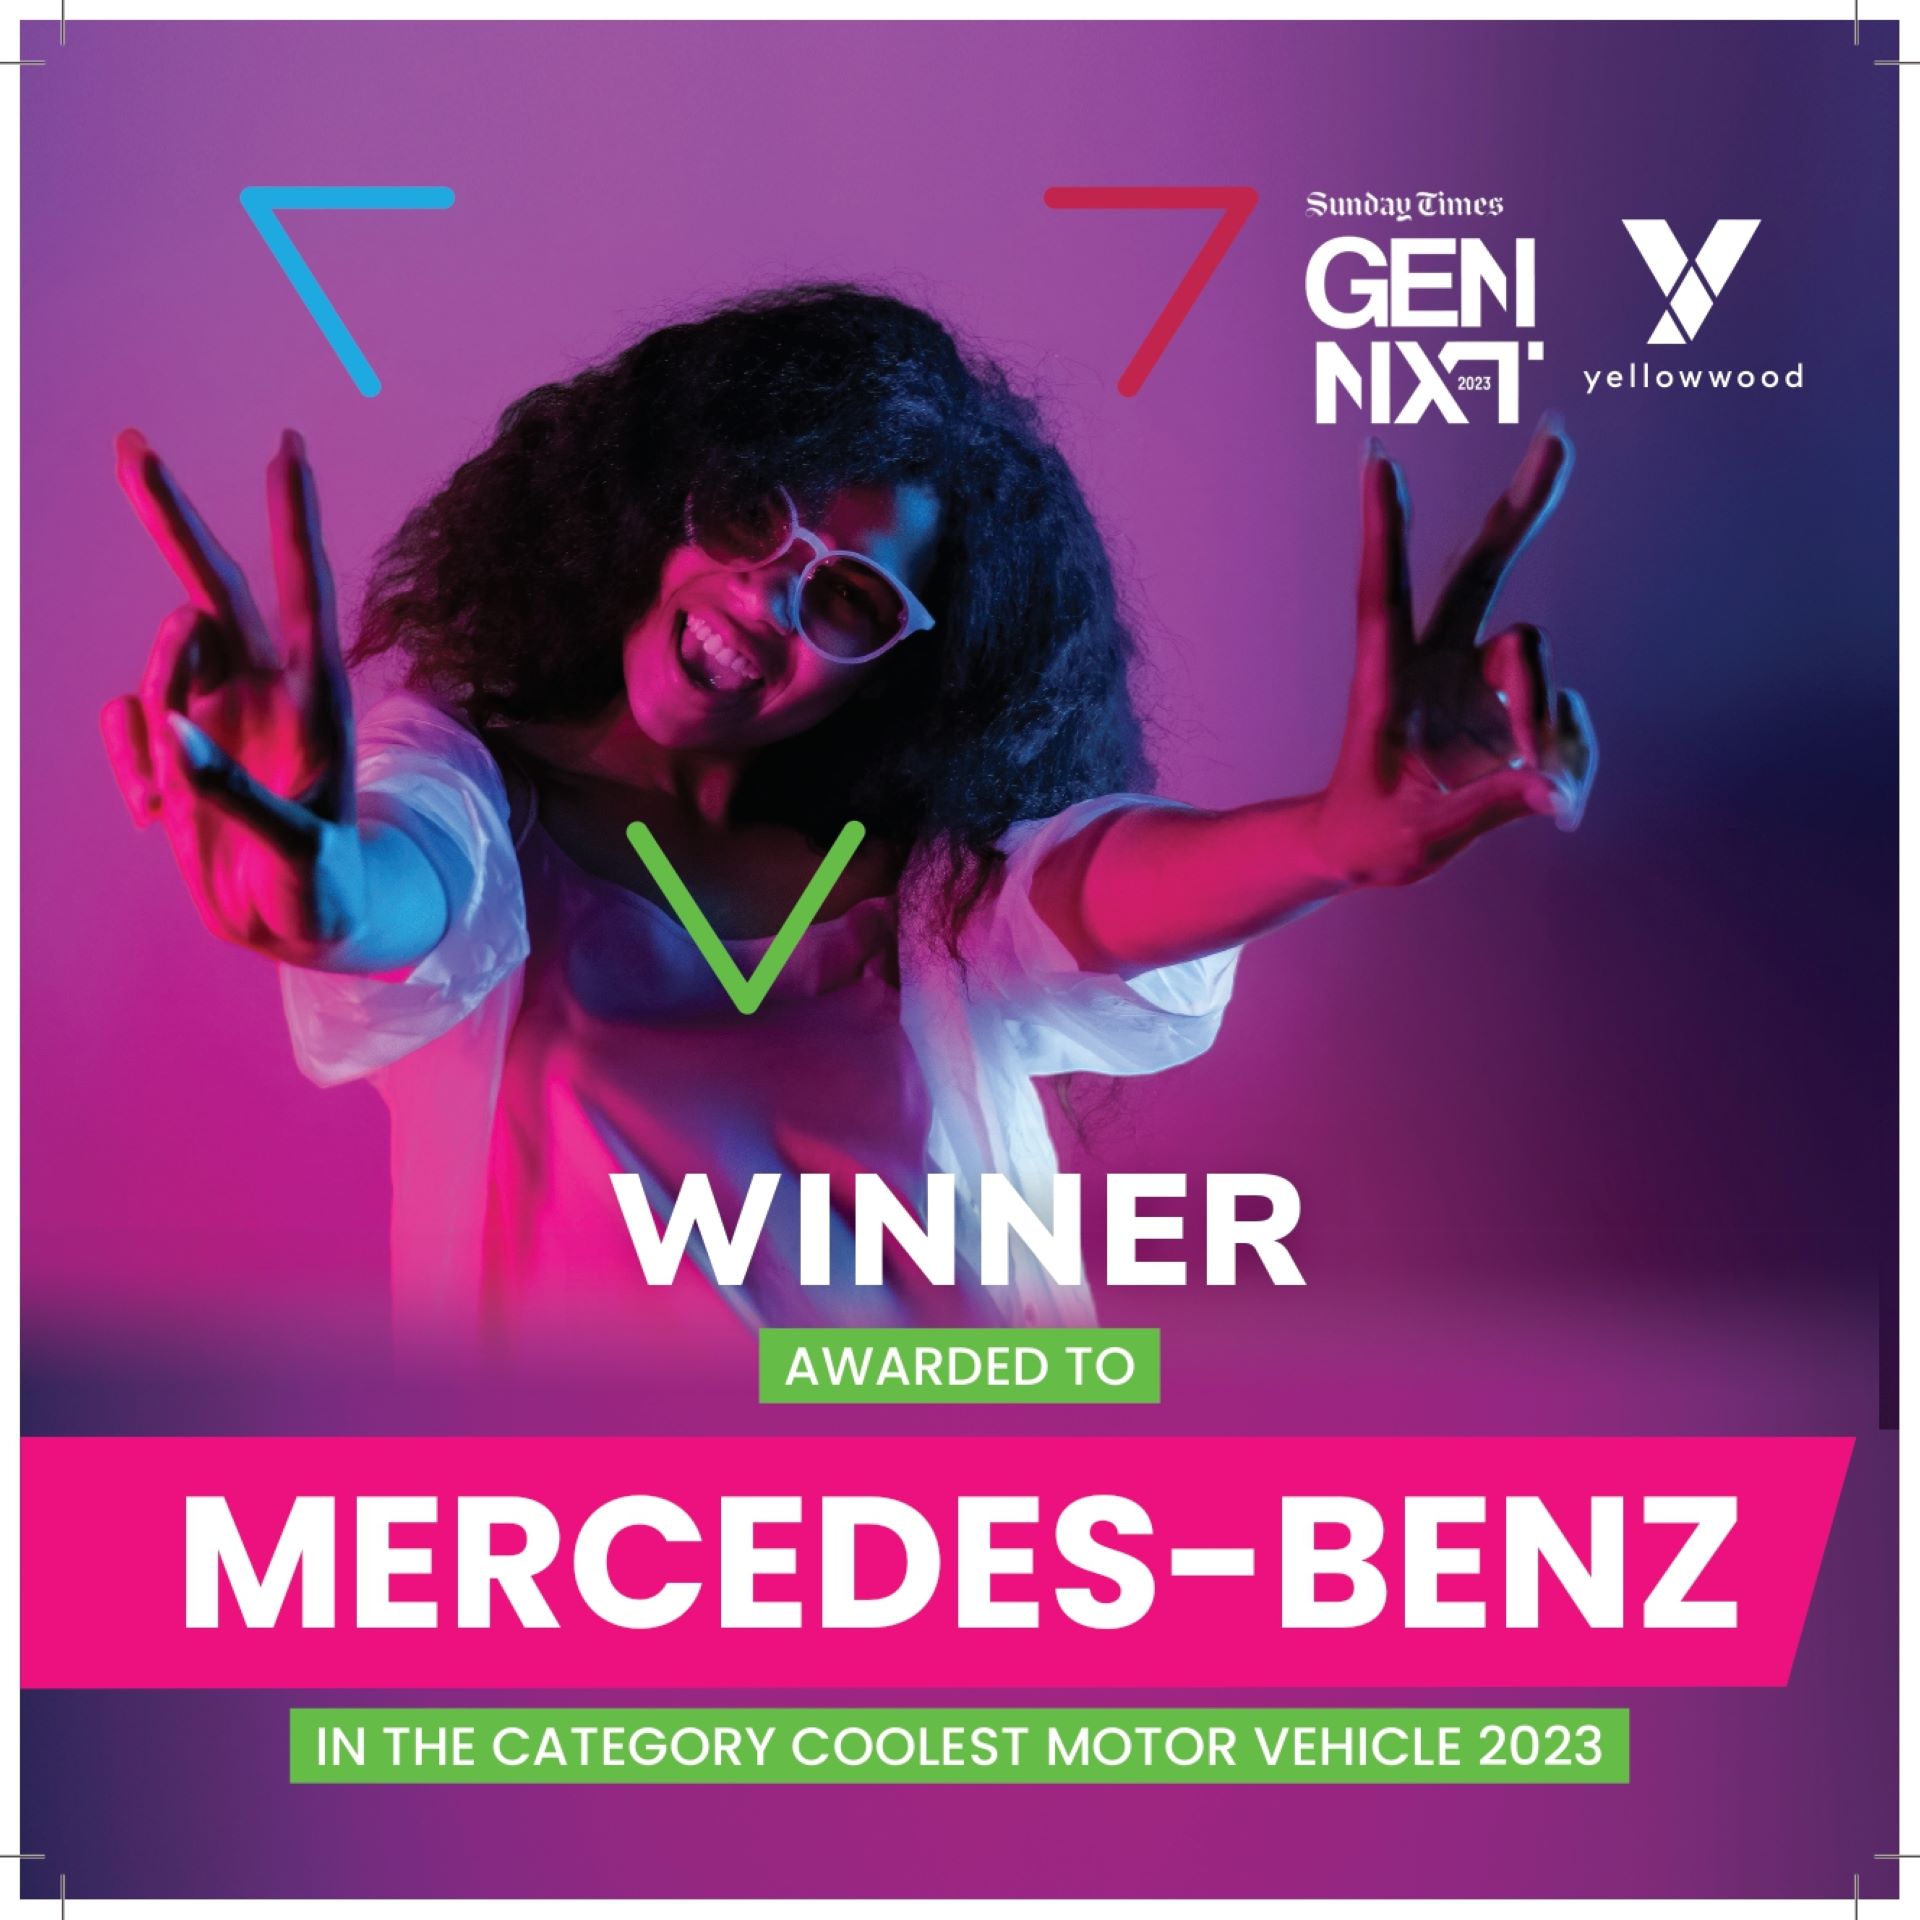 Mercedes Benz South Africa Awarded Coolest Motor Vehicle Brand In South Africa By Sunday Times Gennext